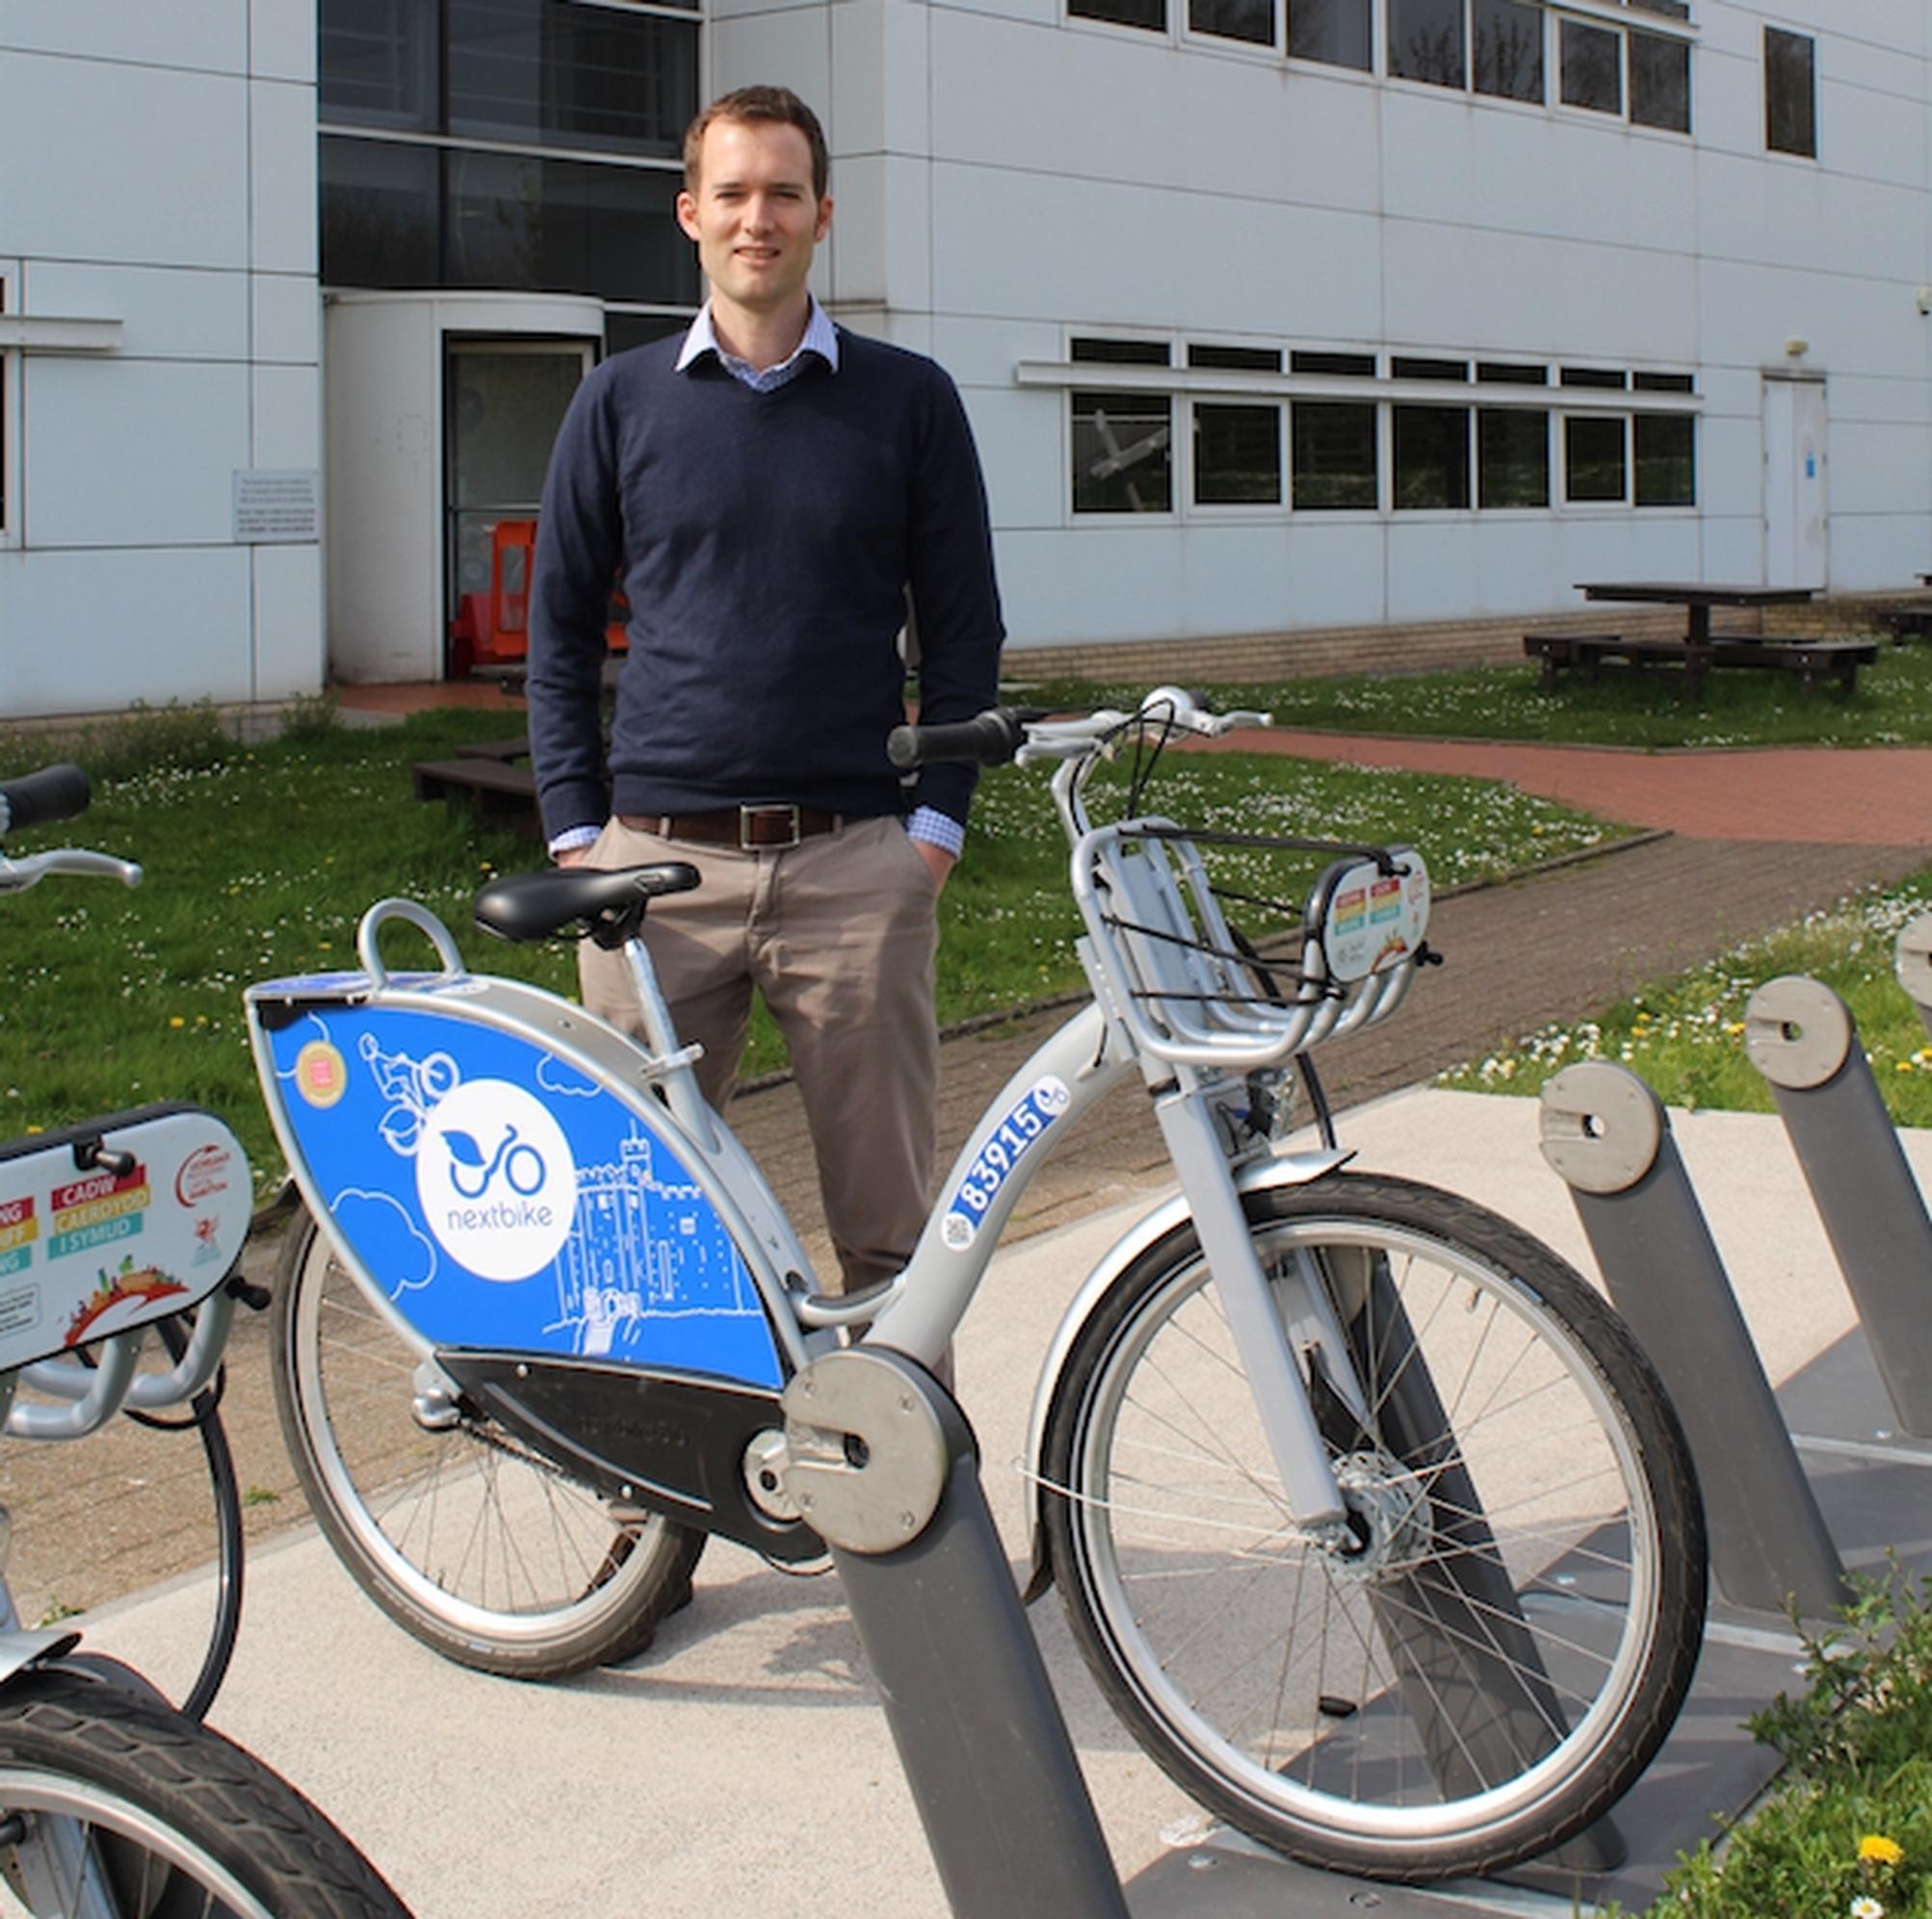 Dr Tom Porter: `The bike hire pilot is a fact-finding process and we will tweak things along the way.`